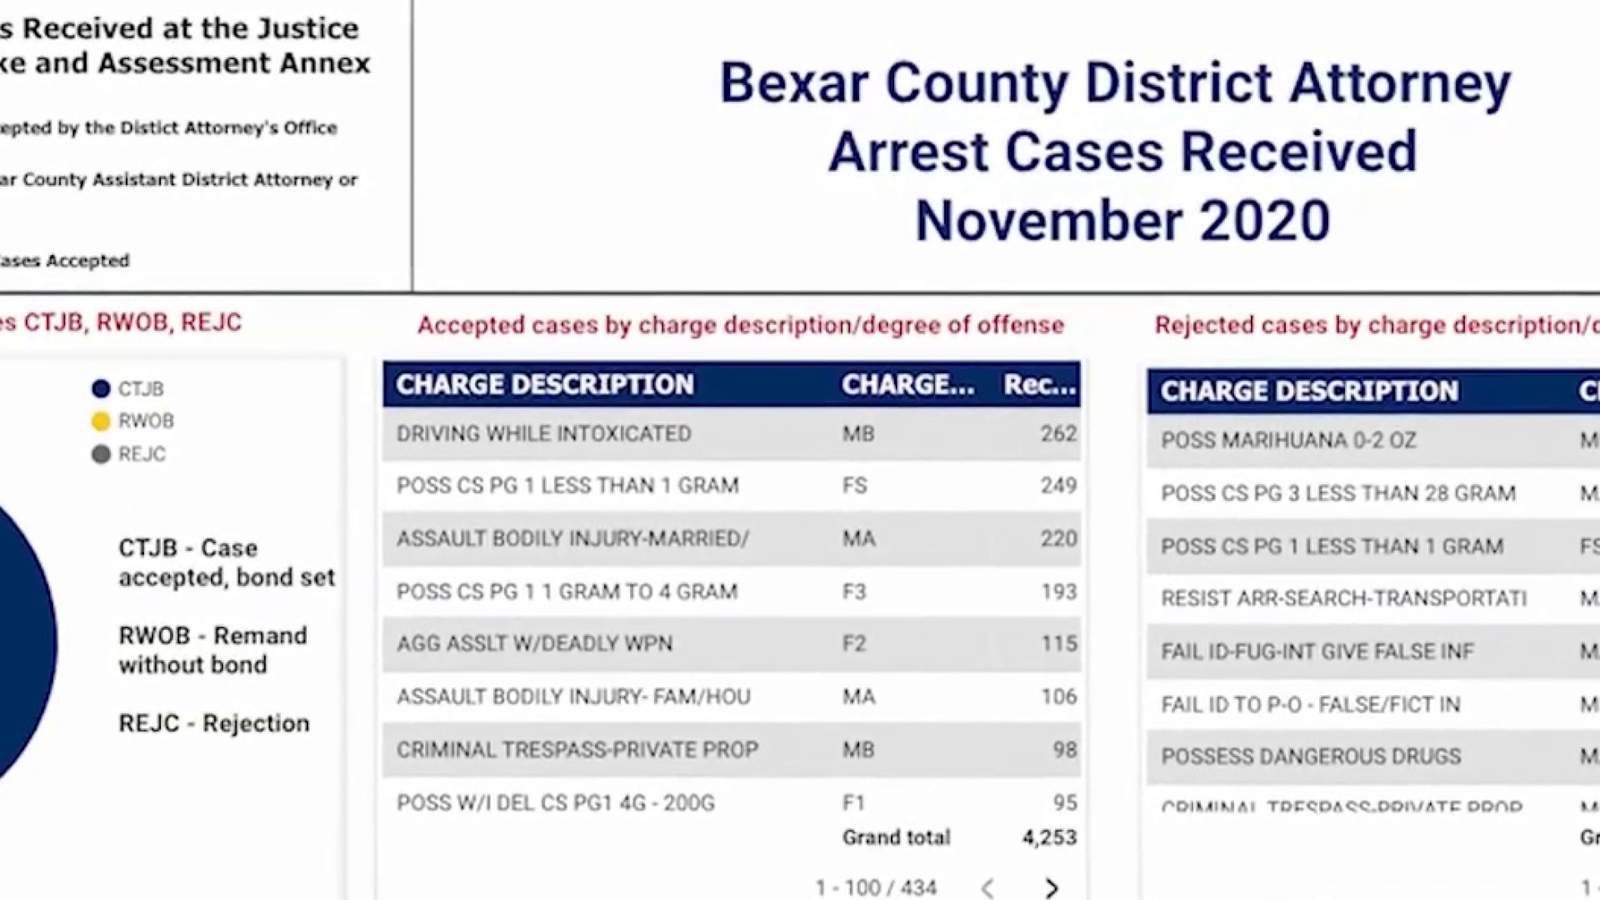 Bexar County District Attorney’s Office establishes additional information dashboards on its website